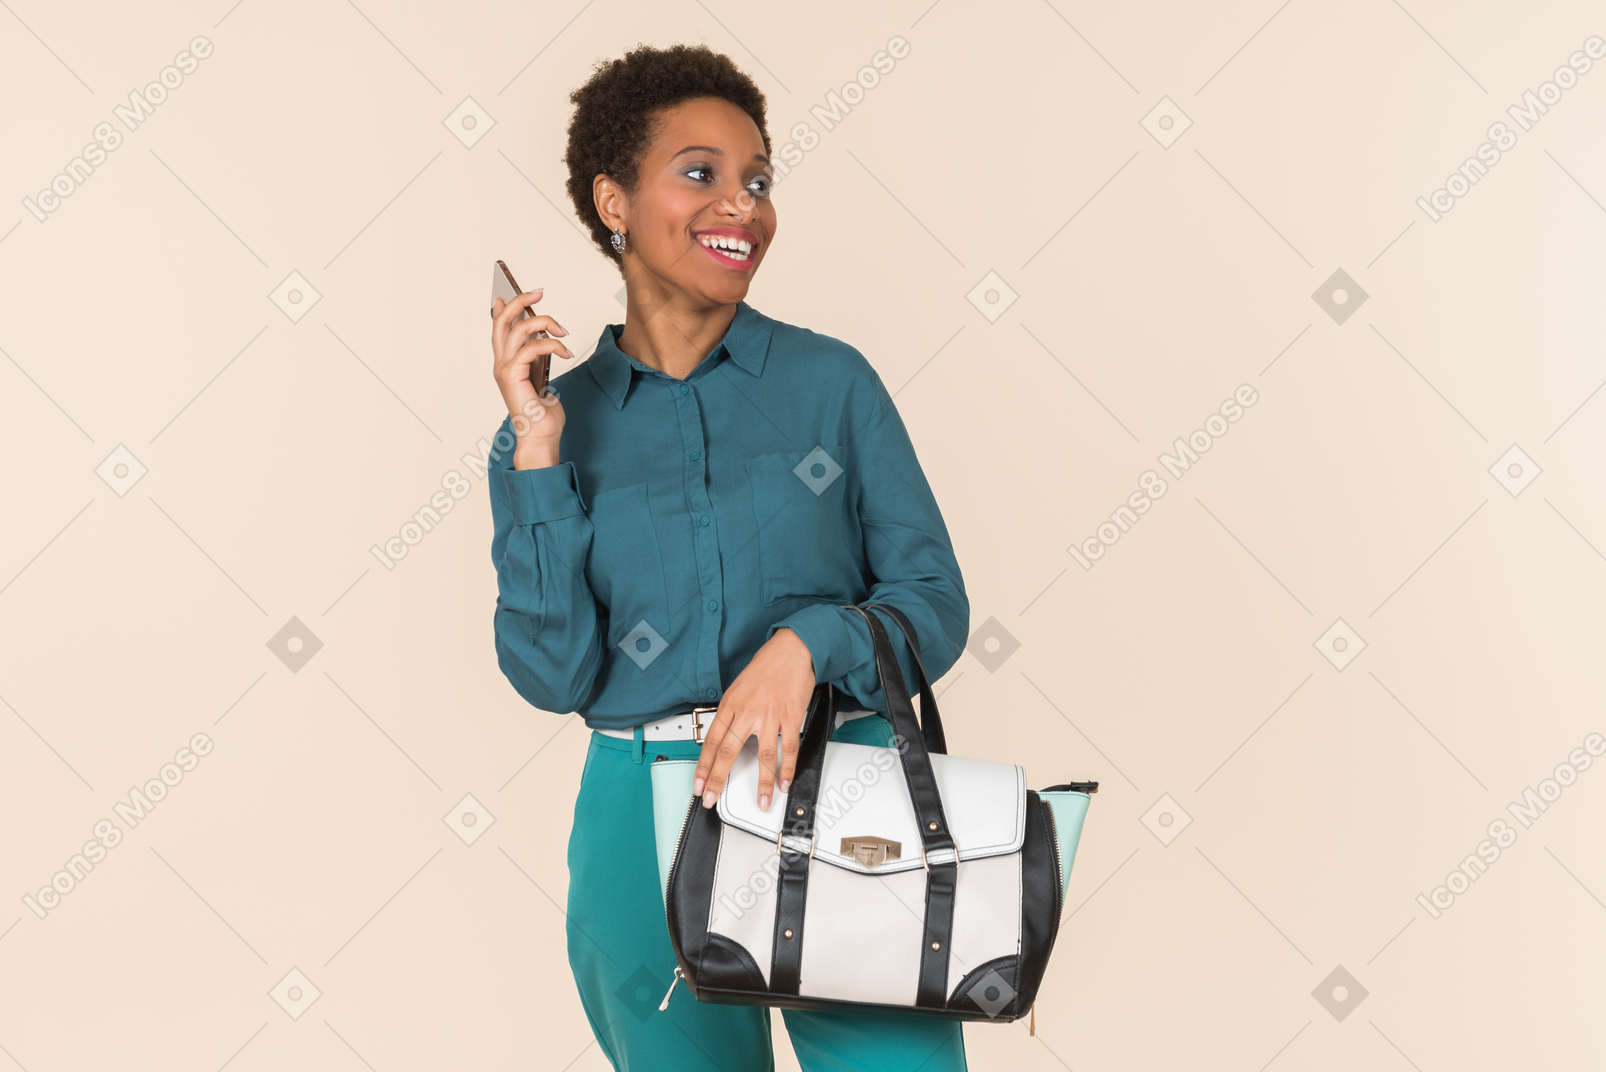 Smiling young woman holding bag and phone